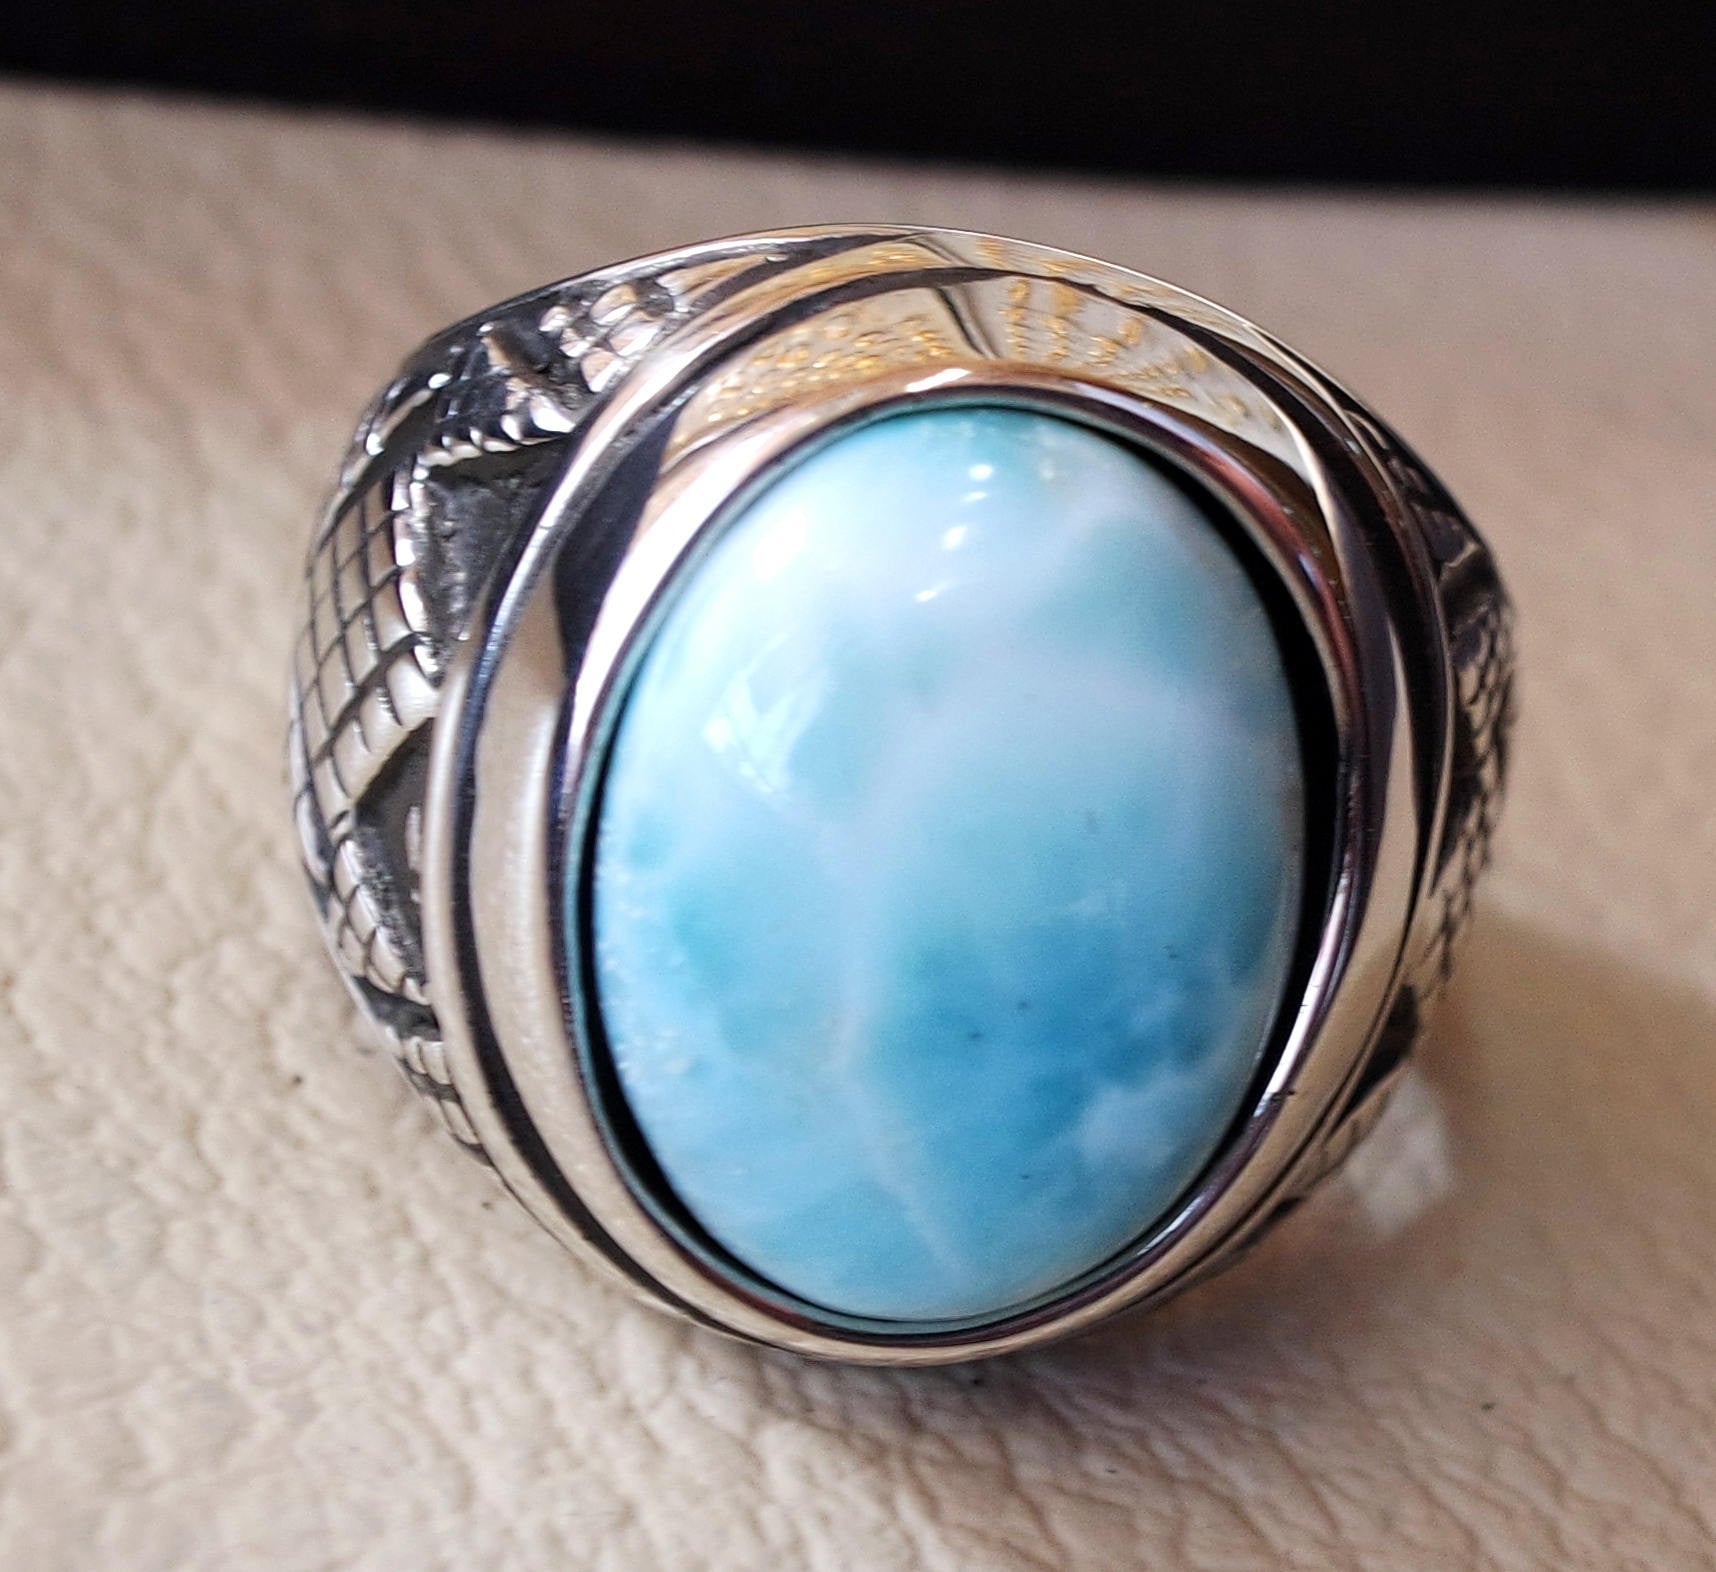 Dominican larimar blue natural stone ring sterling silver 925 men jewelry all sizes semi precious gem highest quality middle eastern style